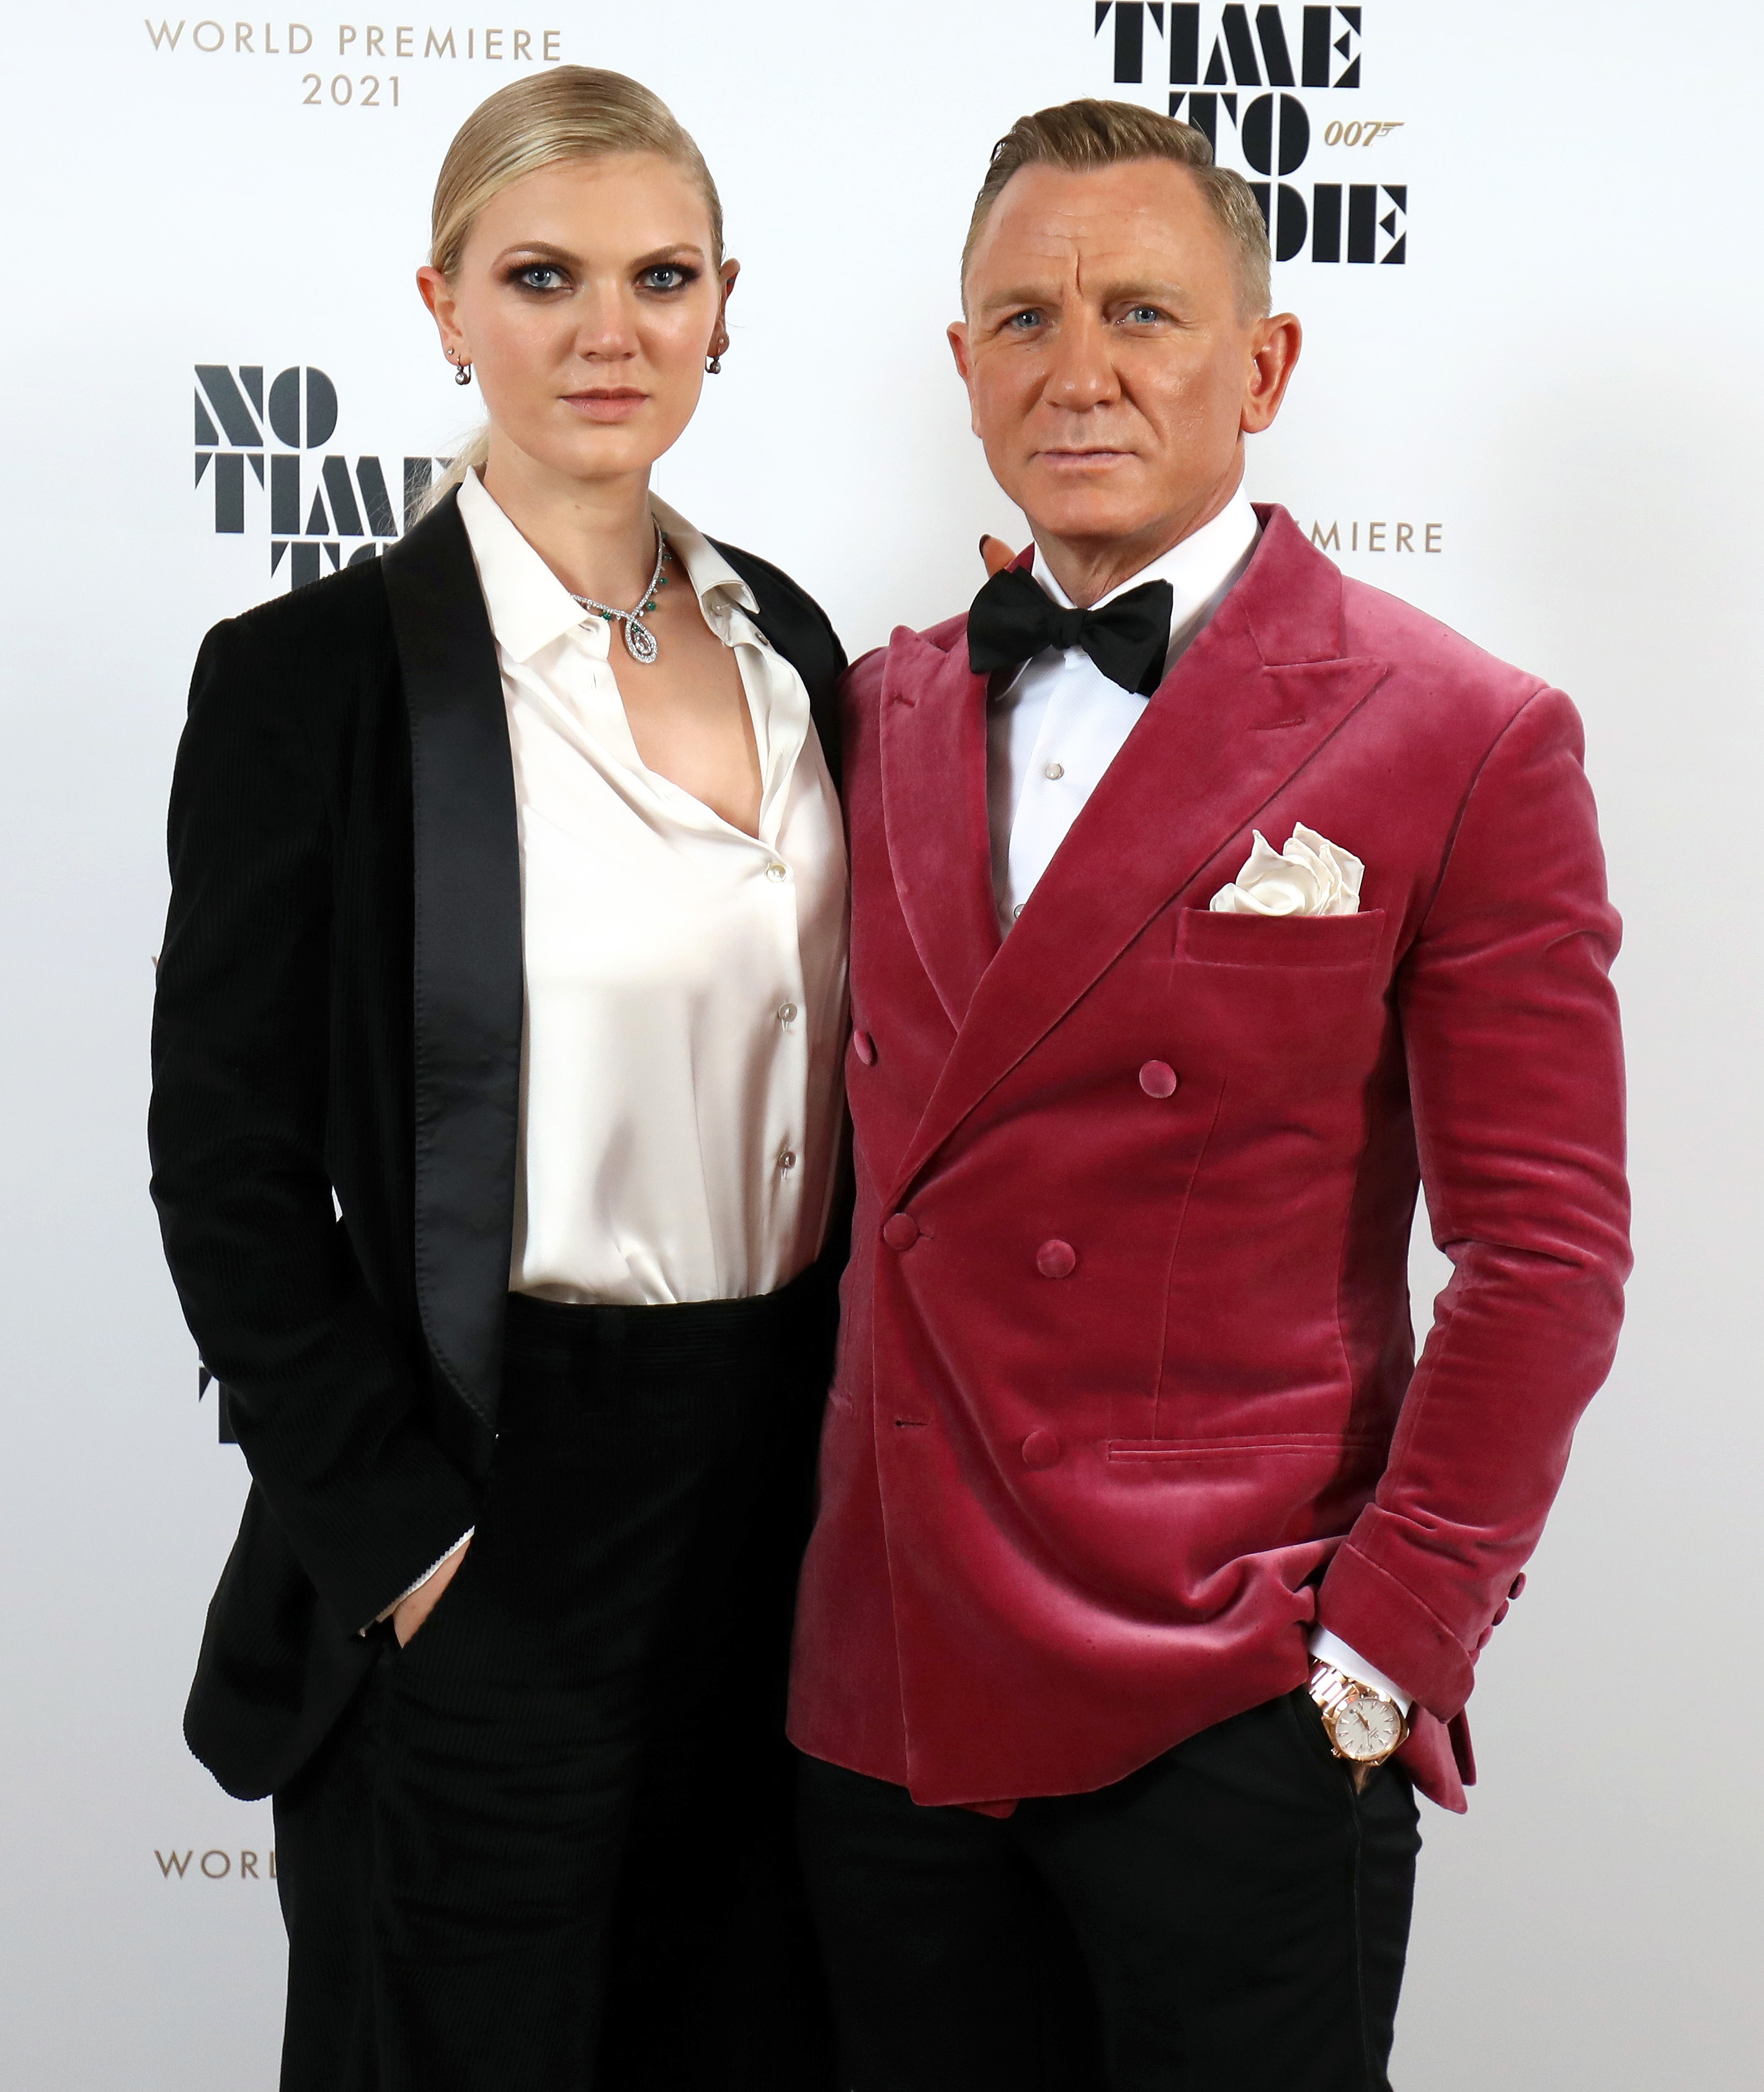 <p><a href="https://www.wonderwall.com/celebrity/profiles/overview/daniel-craig-267.article">Daniel Craig</a> was joined by daughter Ella Loudon -- a model-actress who was born in 1992 -- at <span><a href="https://www.wonderwall.com/awards-events/red-carpet/bond-is-back-see-daniel-craig-and-more-stars-on-the-red-carpet-at-the-no-time-to-die-london-premiere-503223.gallery">the world premiere of his final James Bond film, "No Time to Die," </a>at the Royal Albert Hall in London on Sept. 28, 2021.</span> He has another daughter, who was born in 2018, with second wife Rachel Weisz.</p>